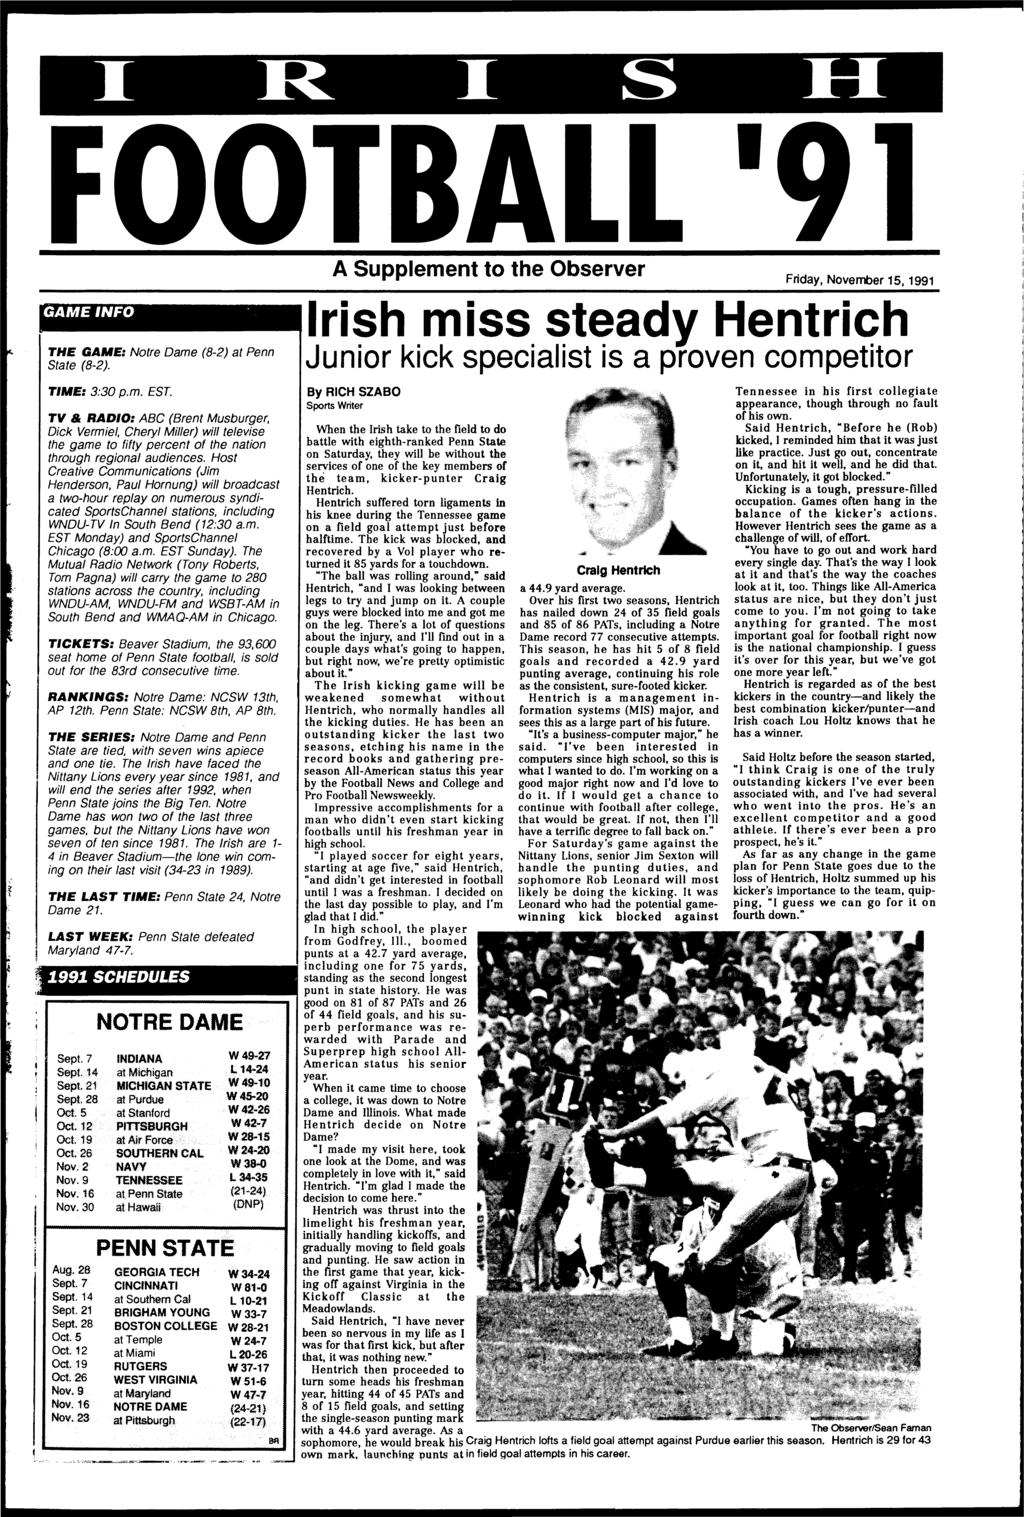 A Supplement to the Observer Friday, November 15, 1991 GAMENFO THE GAME: Notre Dame (8-2) at Penn State (8-2). rish miss steady Hentrich Junior kick specialist is a proven competitor TME: 3:30p.m. EST.